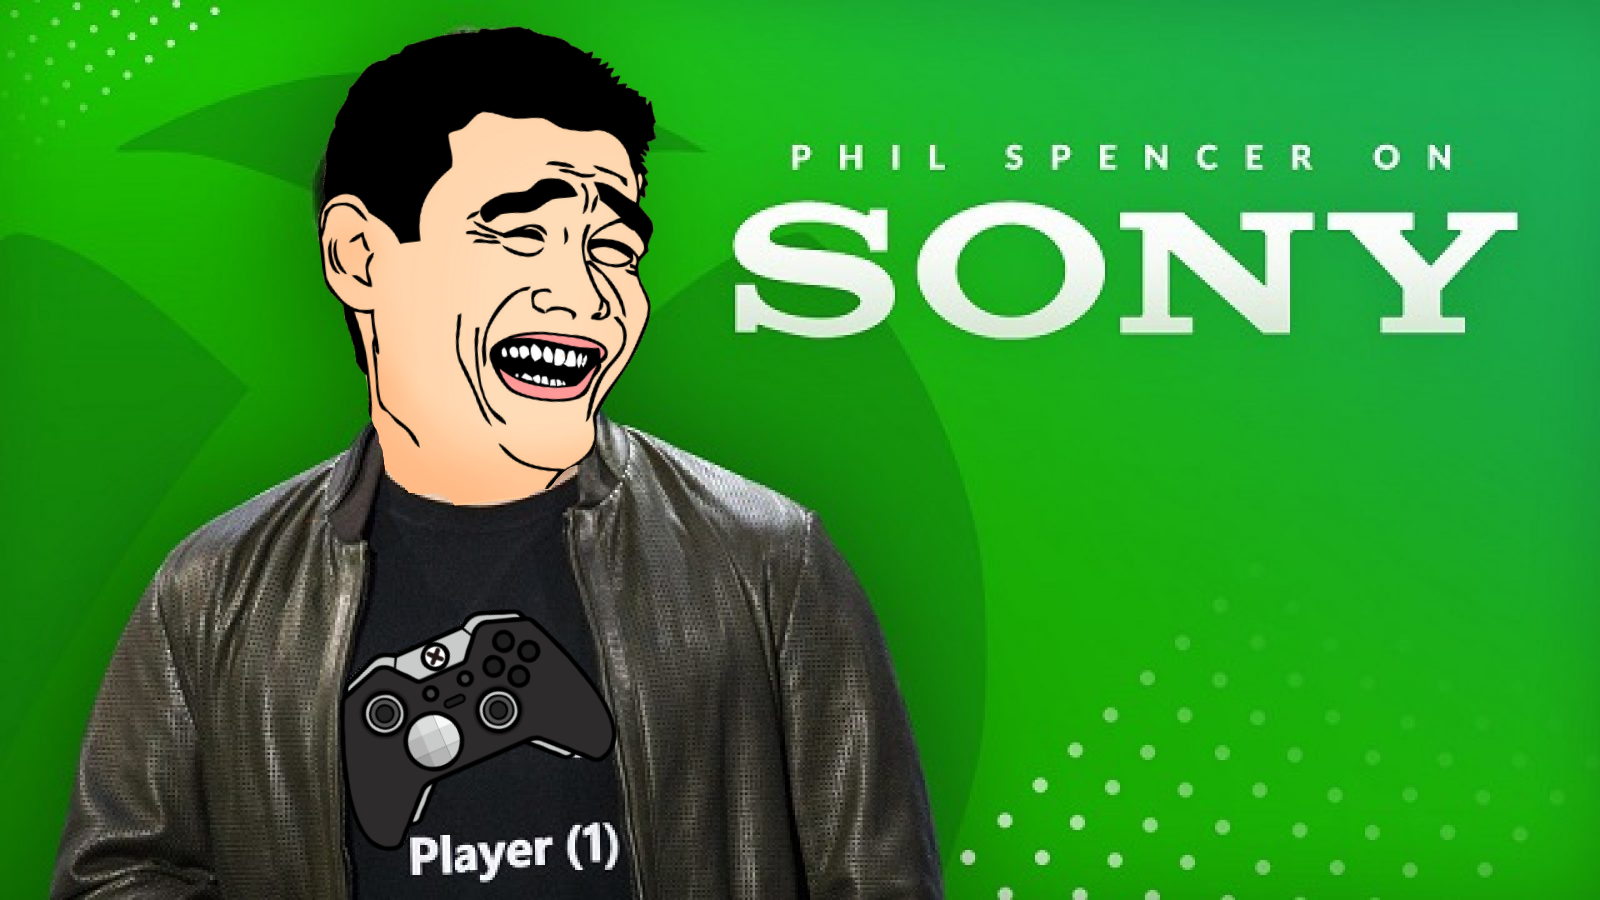 phil-spencer-xbox-sonkxkso.png